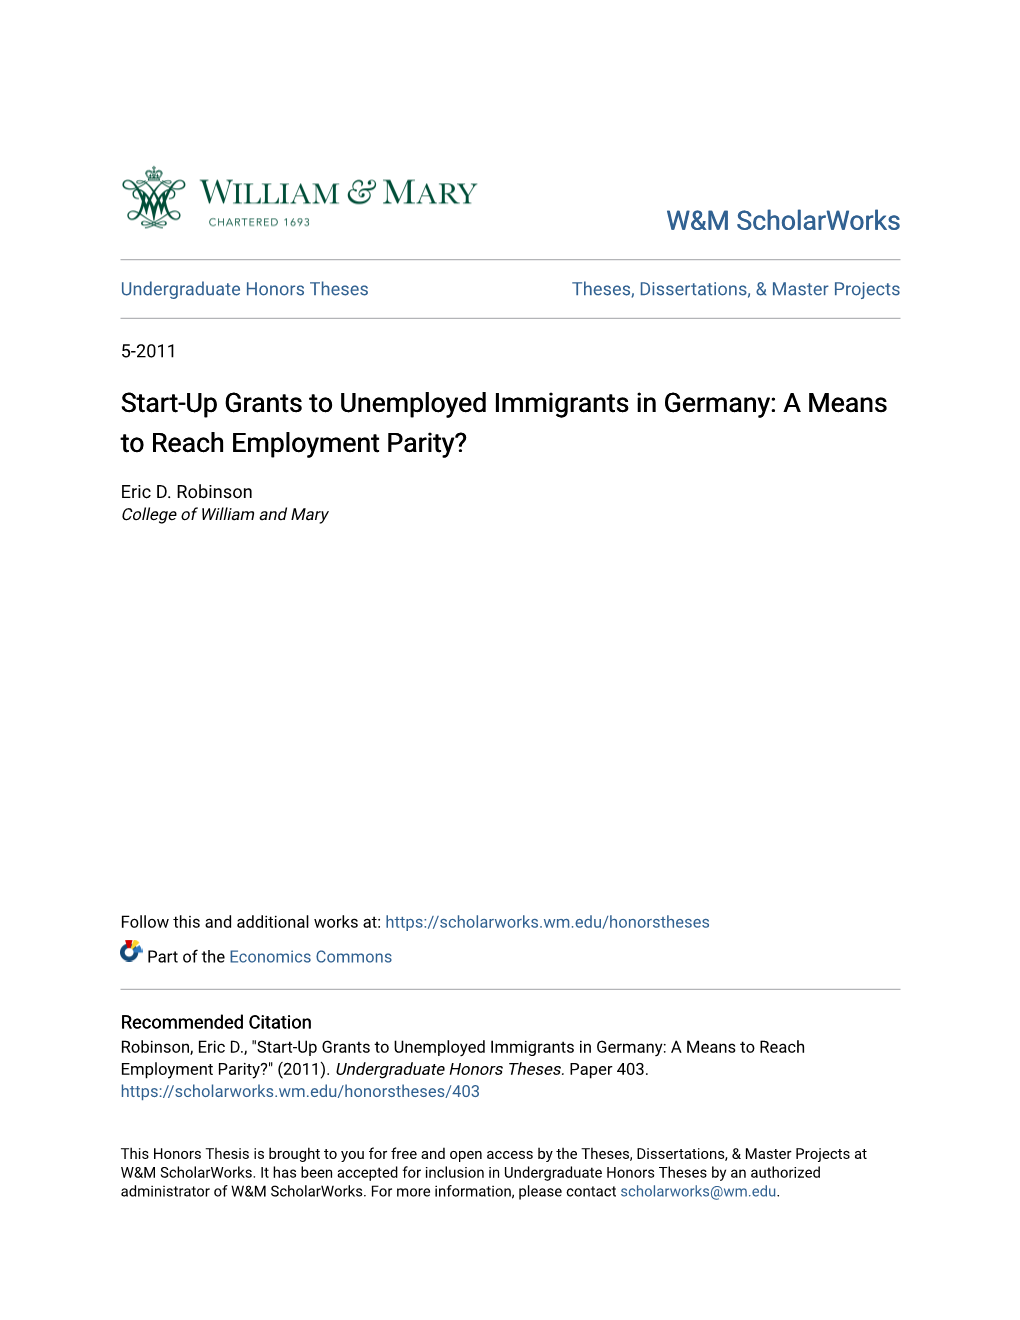 Start-Up Grants to Unemployed Immigrants in Germany: a Means to Reach Employment Parity?